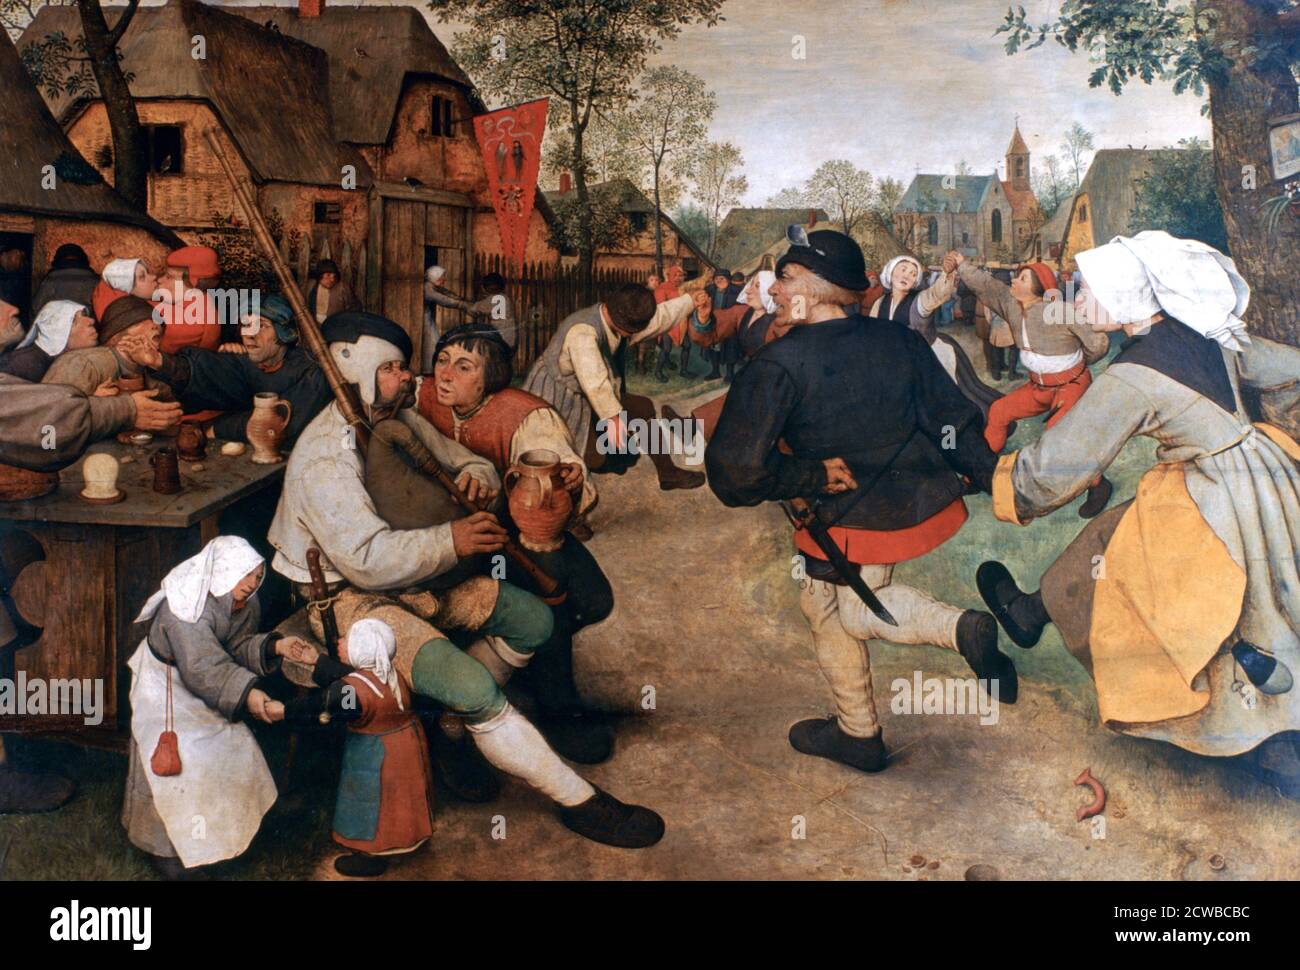 A painting by Pieter Bruegel the Elder titled 'The Peasant Dance', 1568-1569. A traditional dance performed by two couples, marks the opening of a kermesse (village fair), with a. Part of the collection of the Kunsthistorisches Museum, Vienna, Austria. Stock Photo